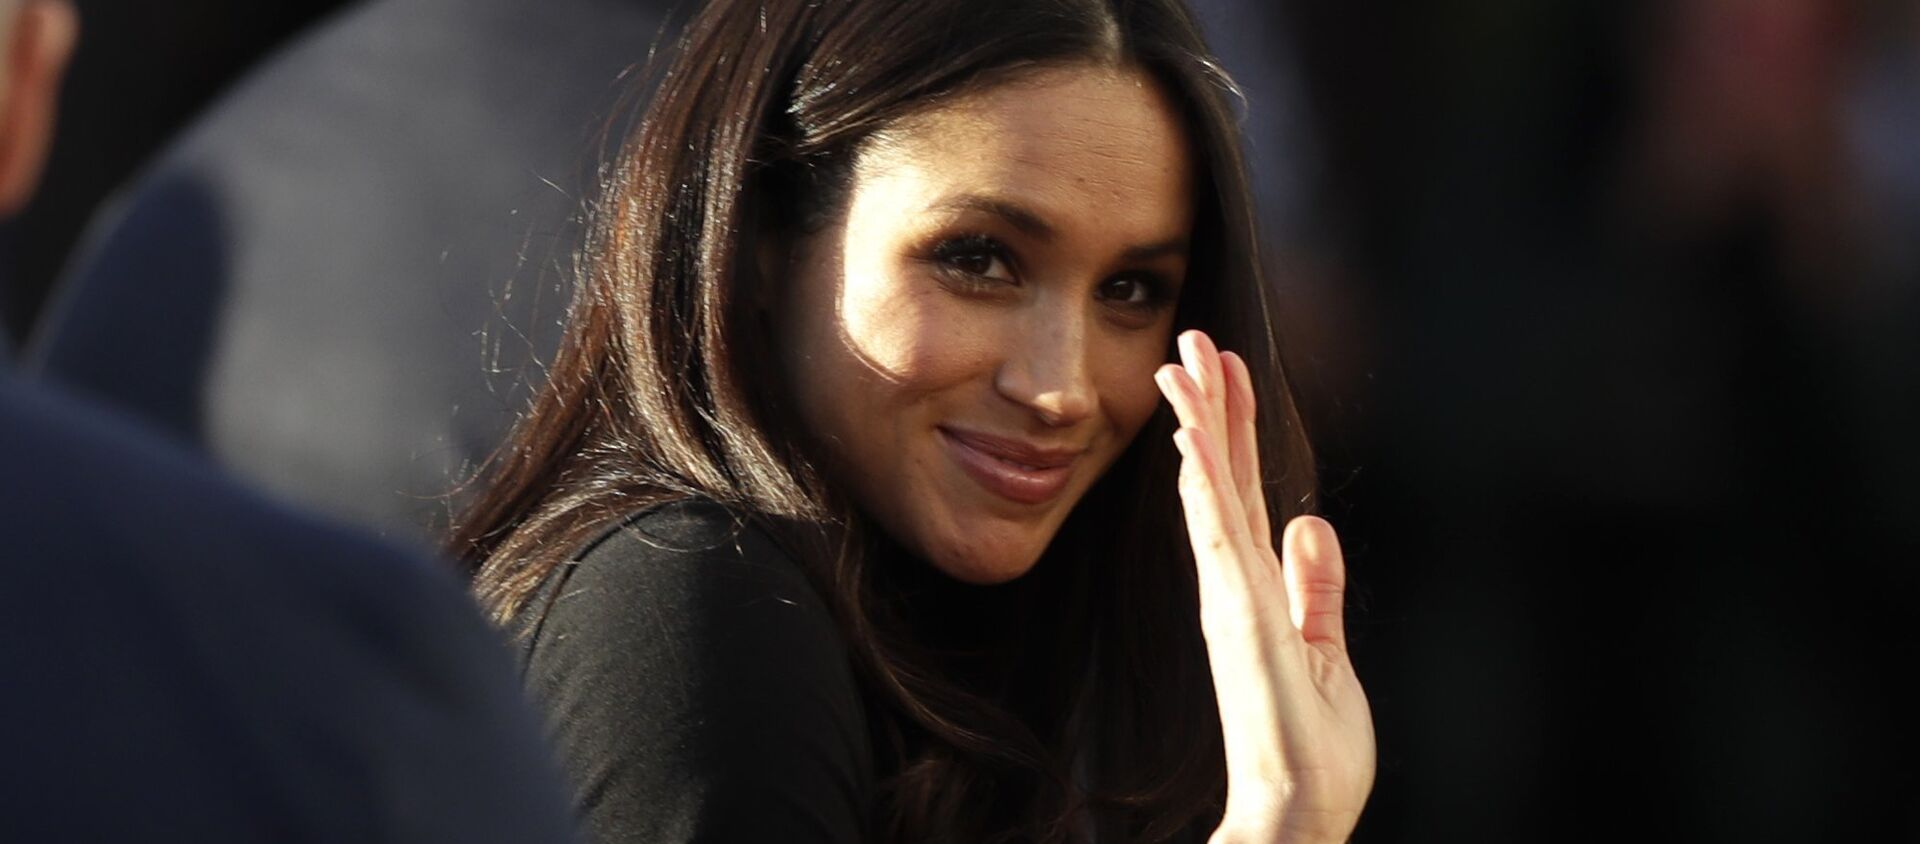 Meghan Markle waves as she leaves with Prince Harry after watching a hip hop opera performance by young people involved in the Full Effect programme at the Nottingham Academy school in Nottingham, England, Friday Dec. 1, 2017 - Sputnik Afrique, 1920, 05.07.2018